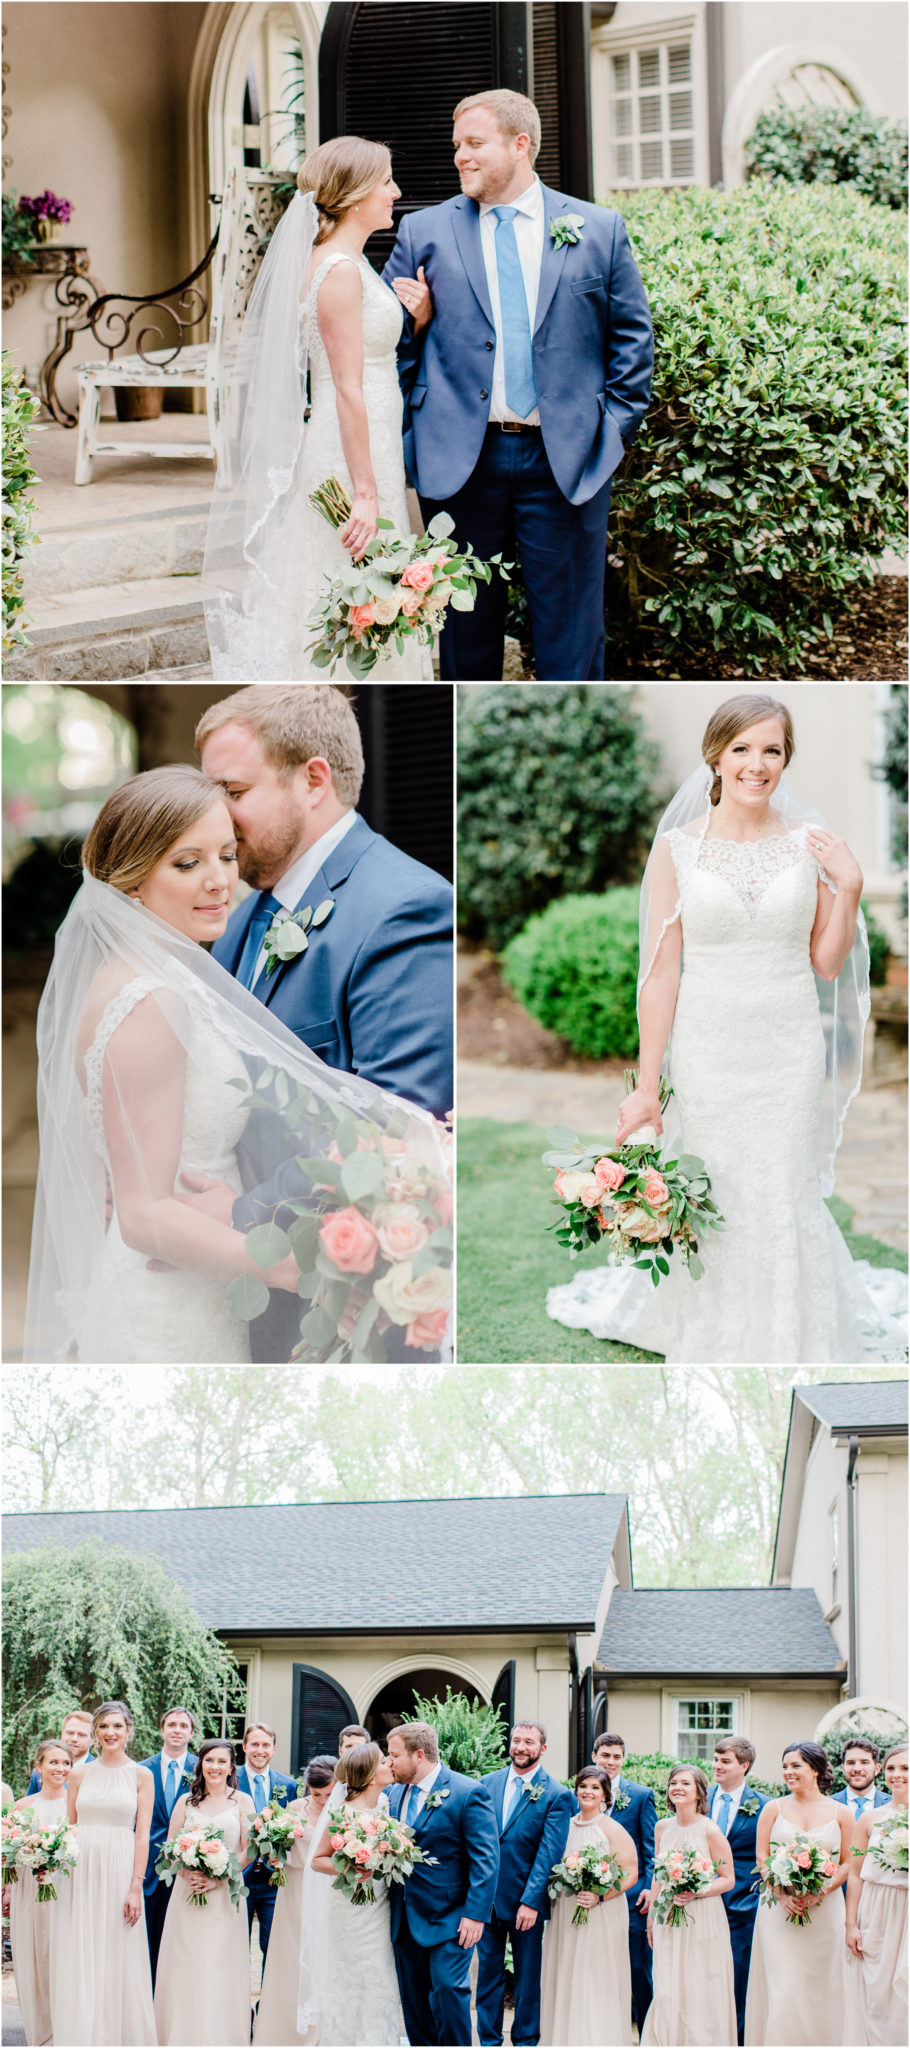 Lions Gate Manor wedding filled with blush navy and champagne accents